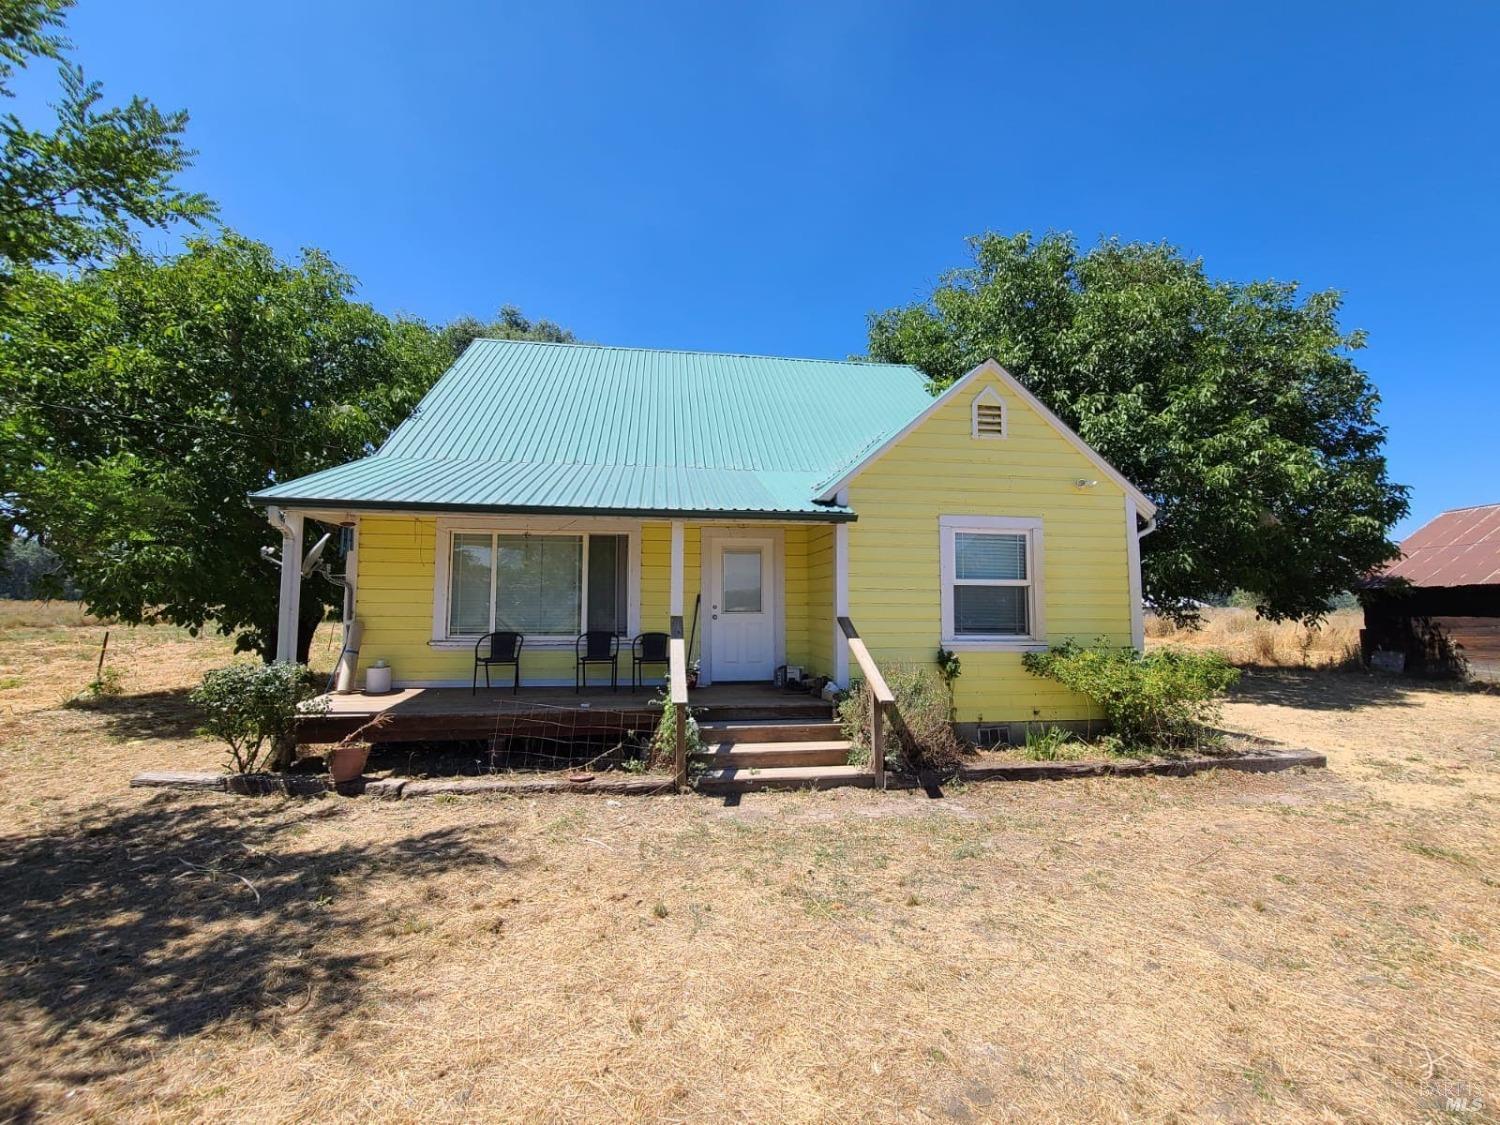 Photo of 24700 Mendocino Pass Rd in Covelo, CA